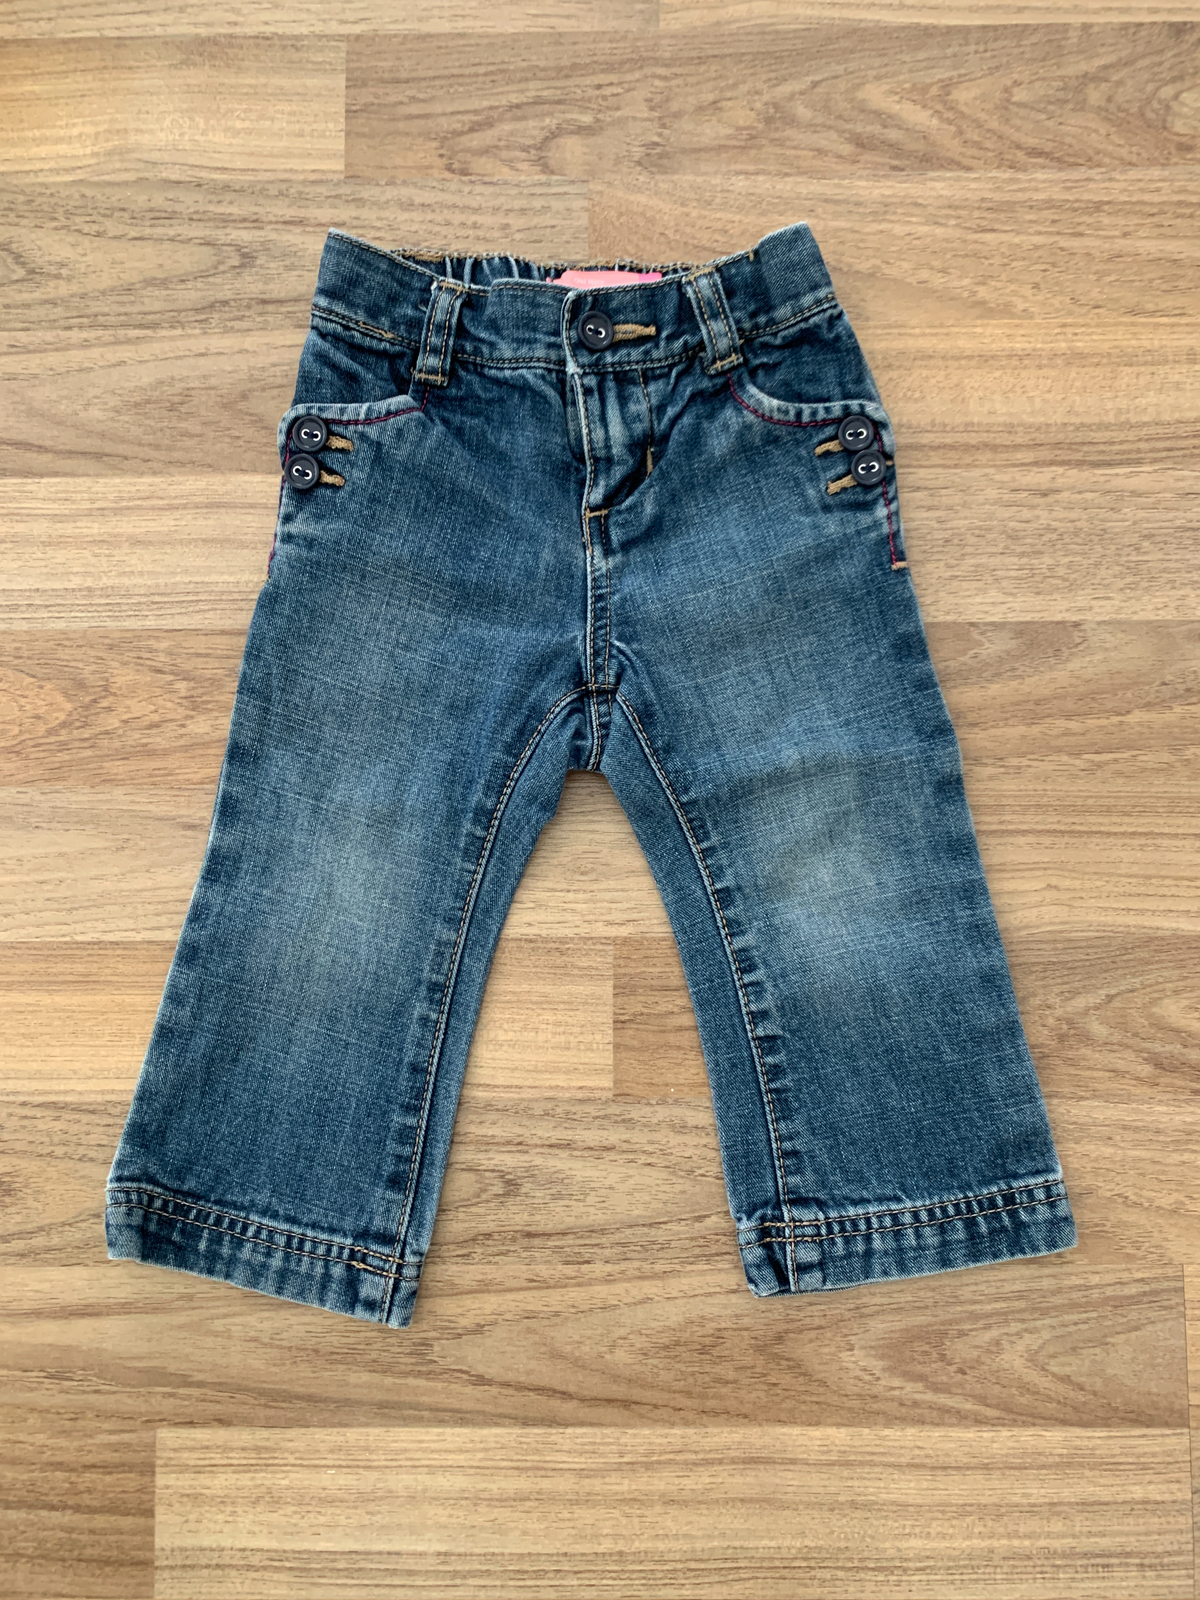 Jeans (Girls Size 18-24M)